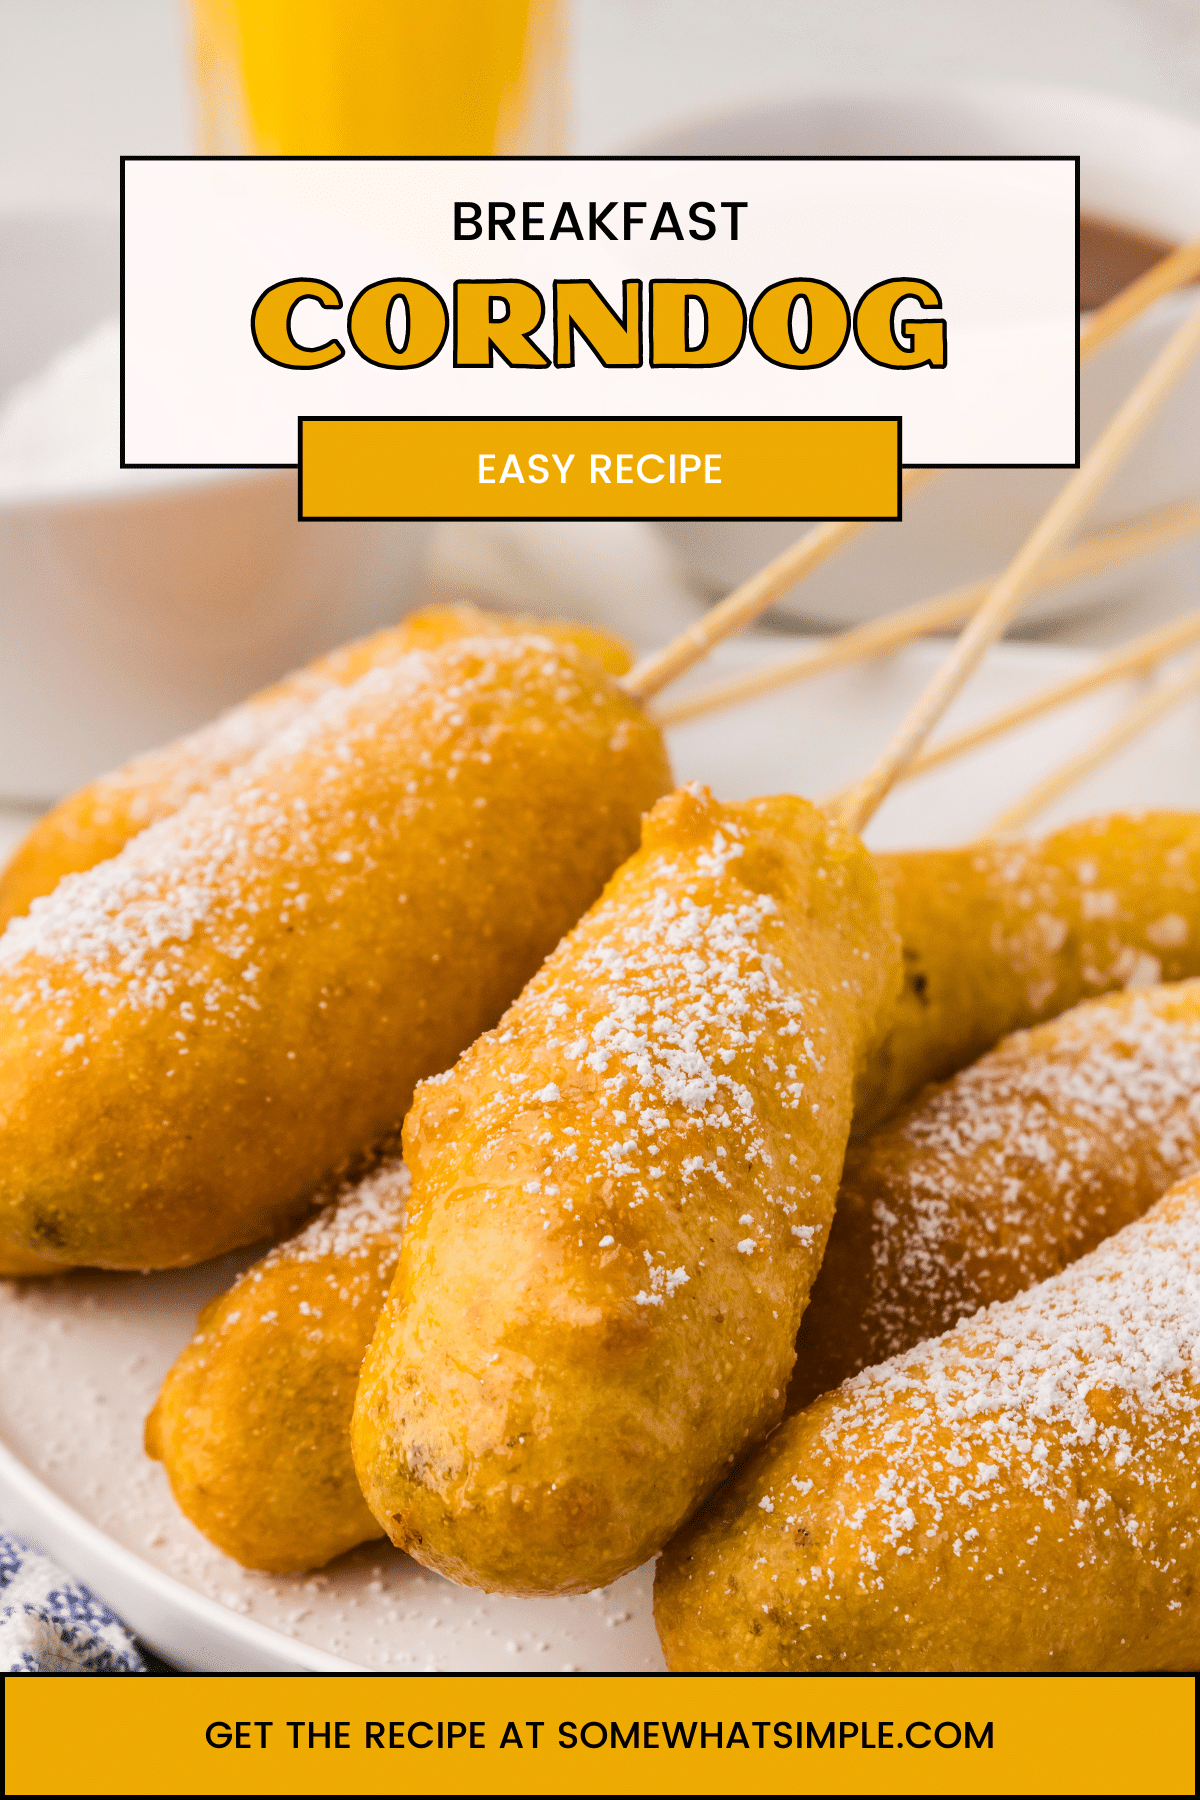 Easy, delicious, and fun to eat, these Breakfast Corn Dogs are a morning-friendly twist on a classic lunch or dinner. via @somewhatsimple